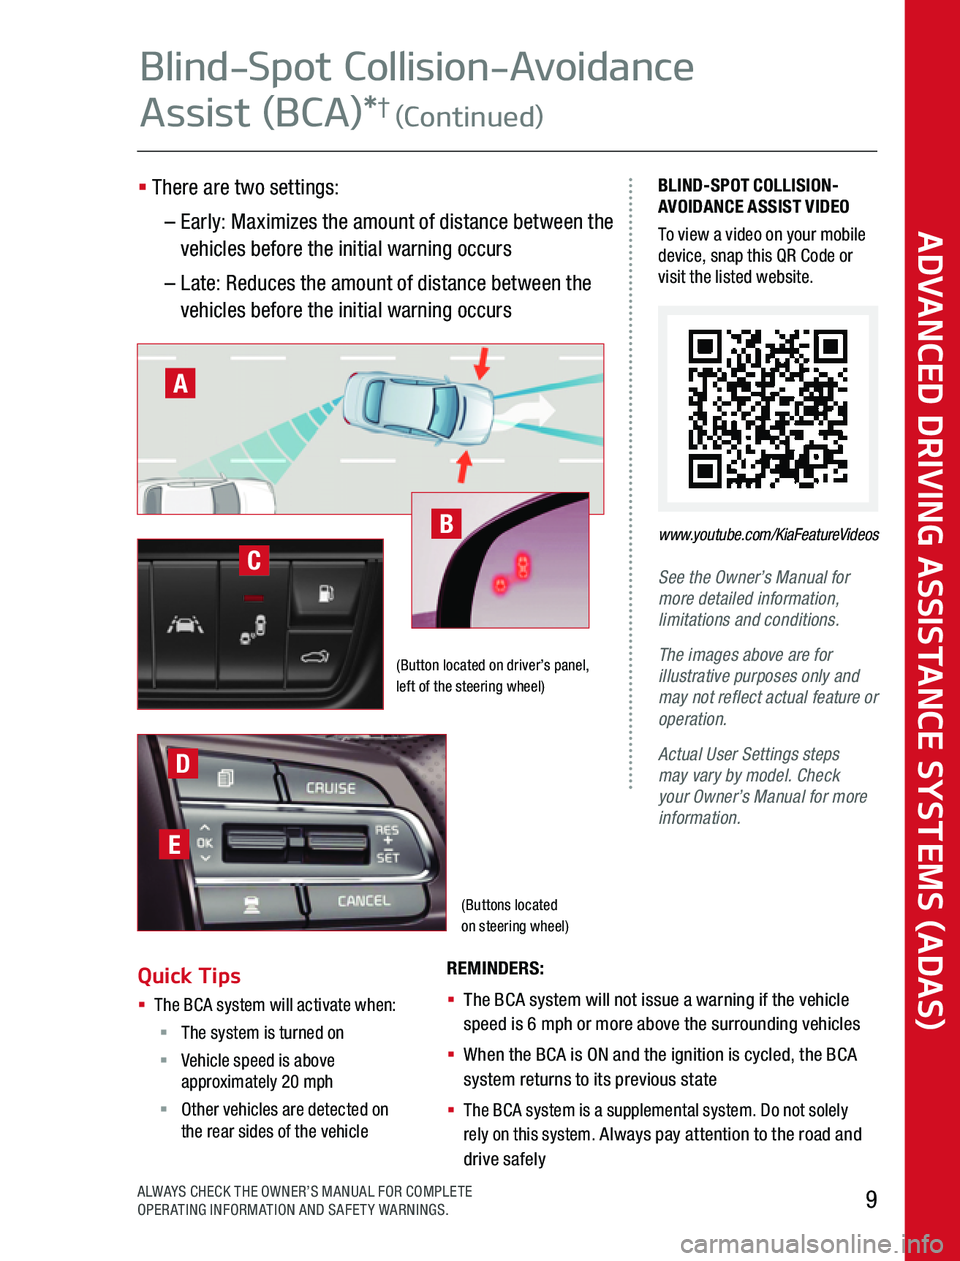 KIA OPTIMA PHEV 2020  Advanced Driving Assistance System (Buttons located  on steering wheel)
BLIND-SPOT COLLISION-AVOIDANCE ASSIST VIDEOTo view a video on your mobile device, snap this QR Code or visit the listed website  
See the Owner’s Manual for more